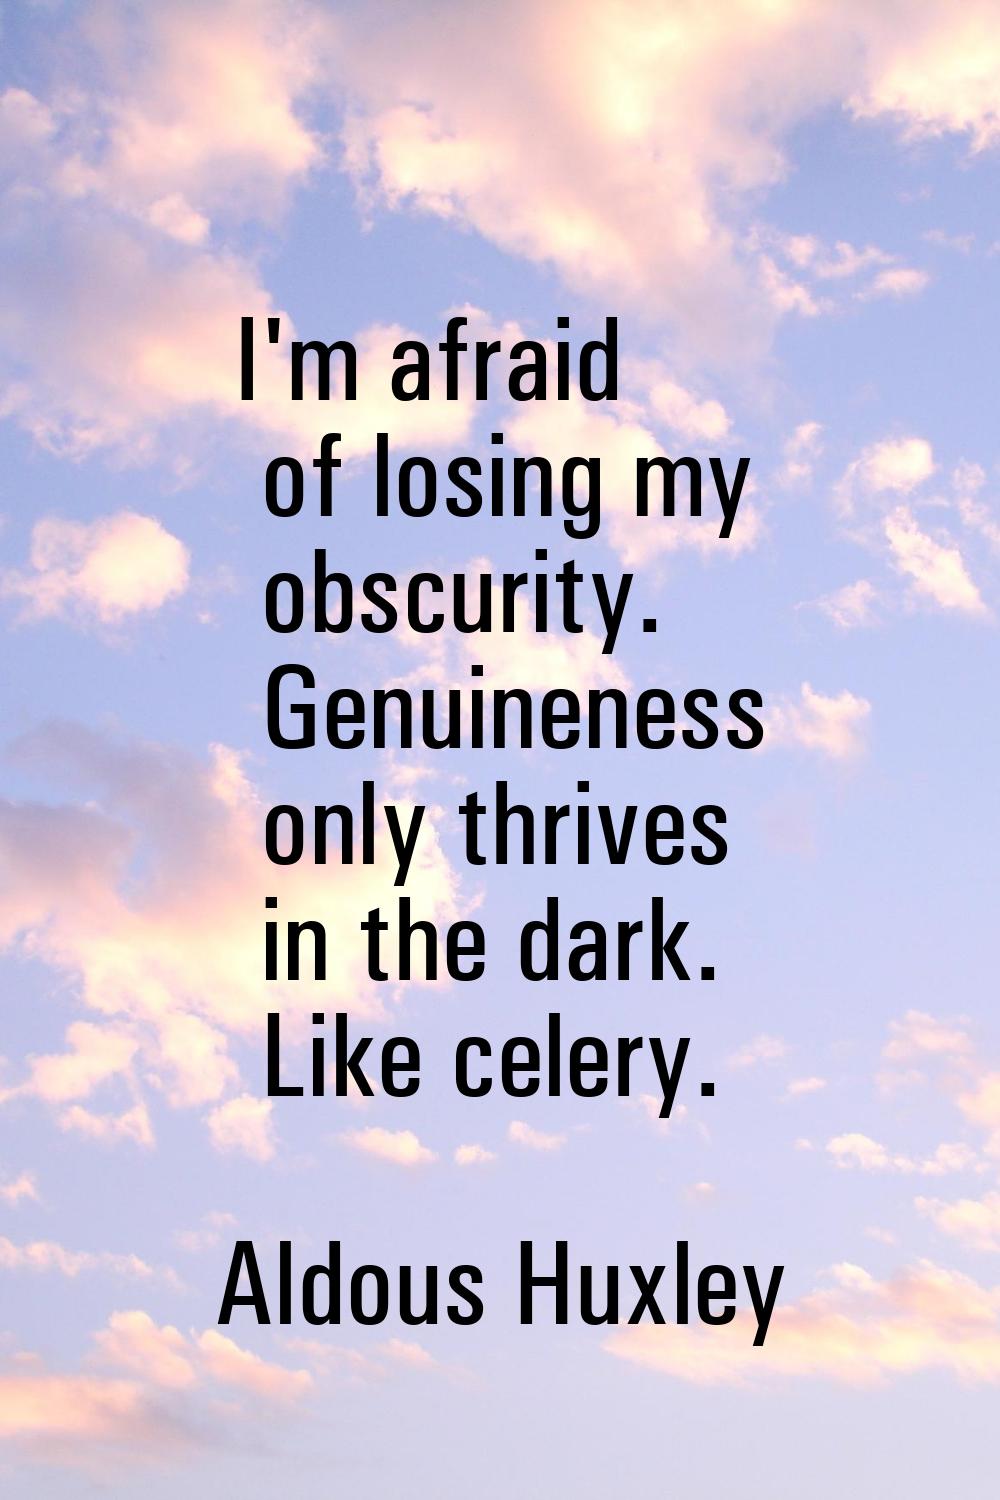 I'm afraid of losing my obscurity. Genuineness only thrives in the dark. Like celery.